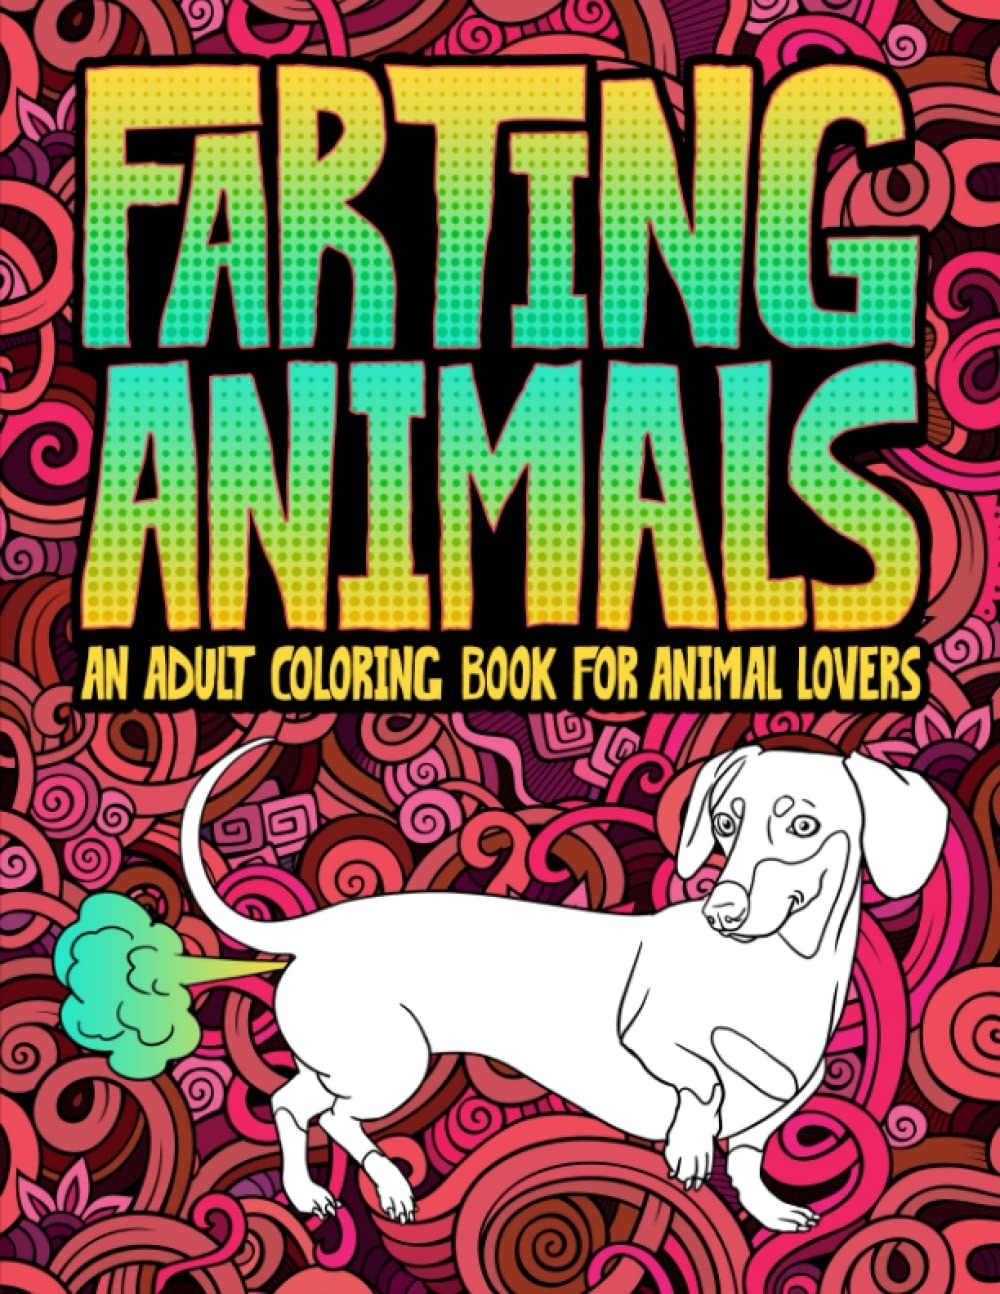 the front cover of the colouring book